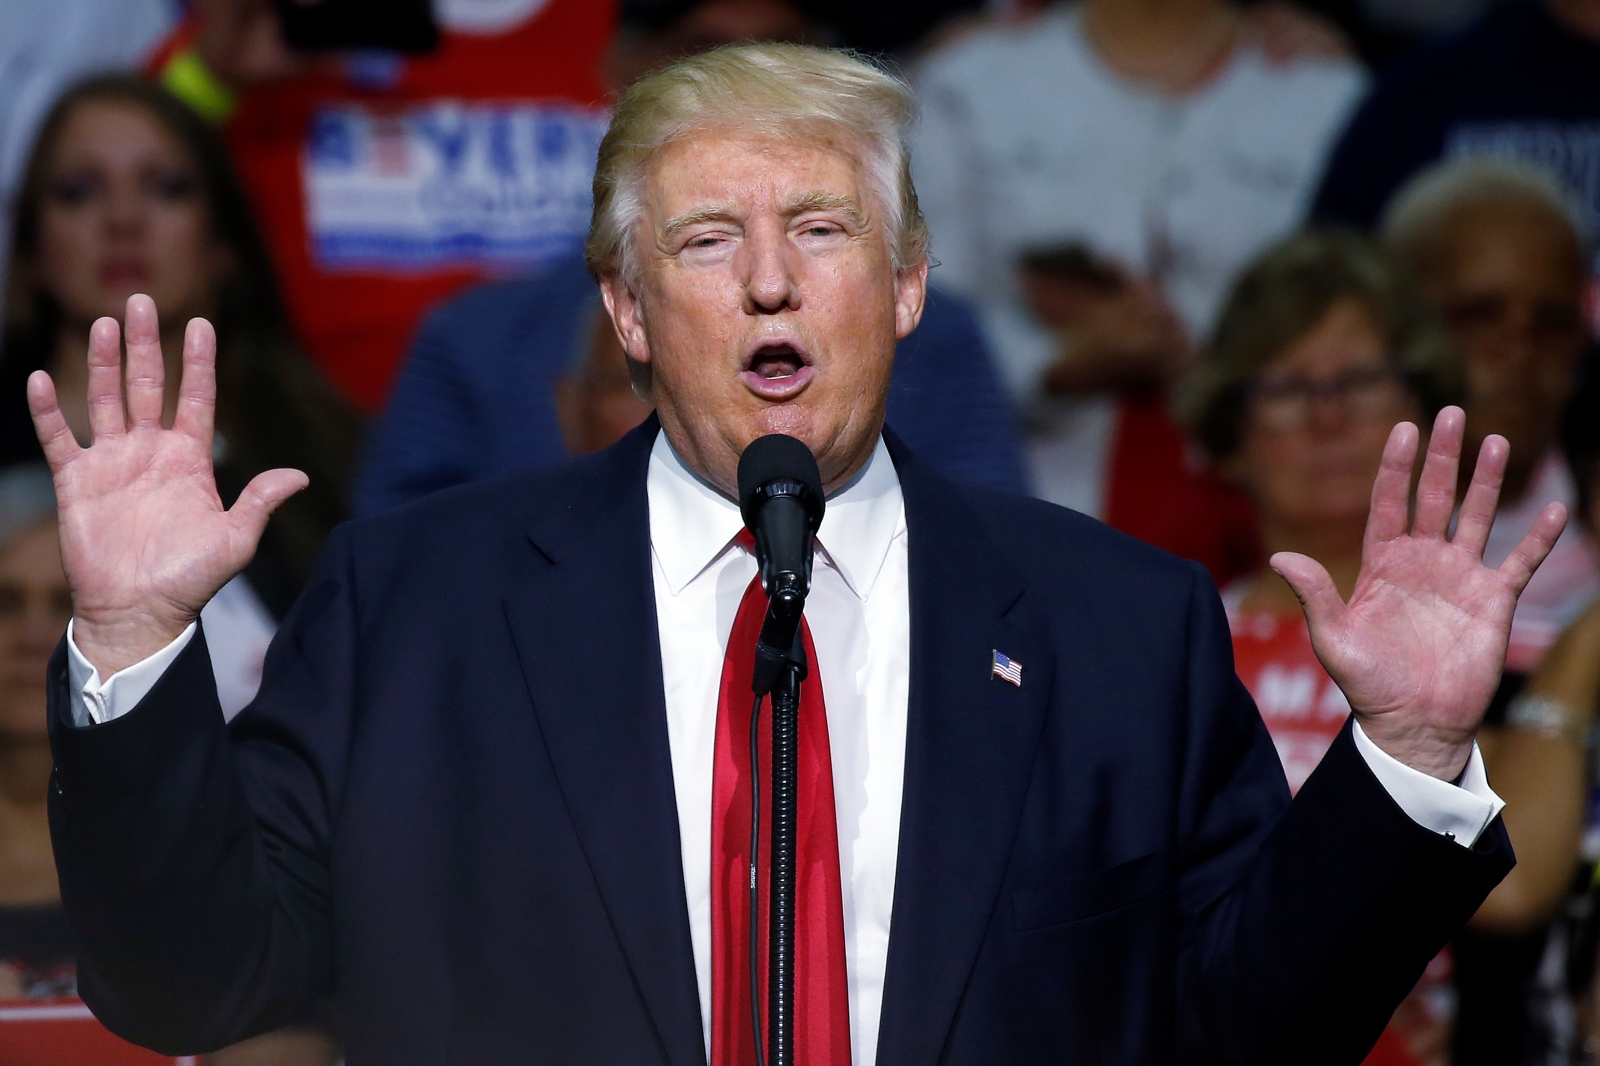 Donald Trump explains that illegal immigrants would have to self-deport first